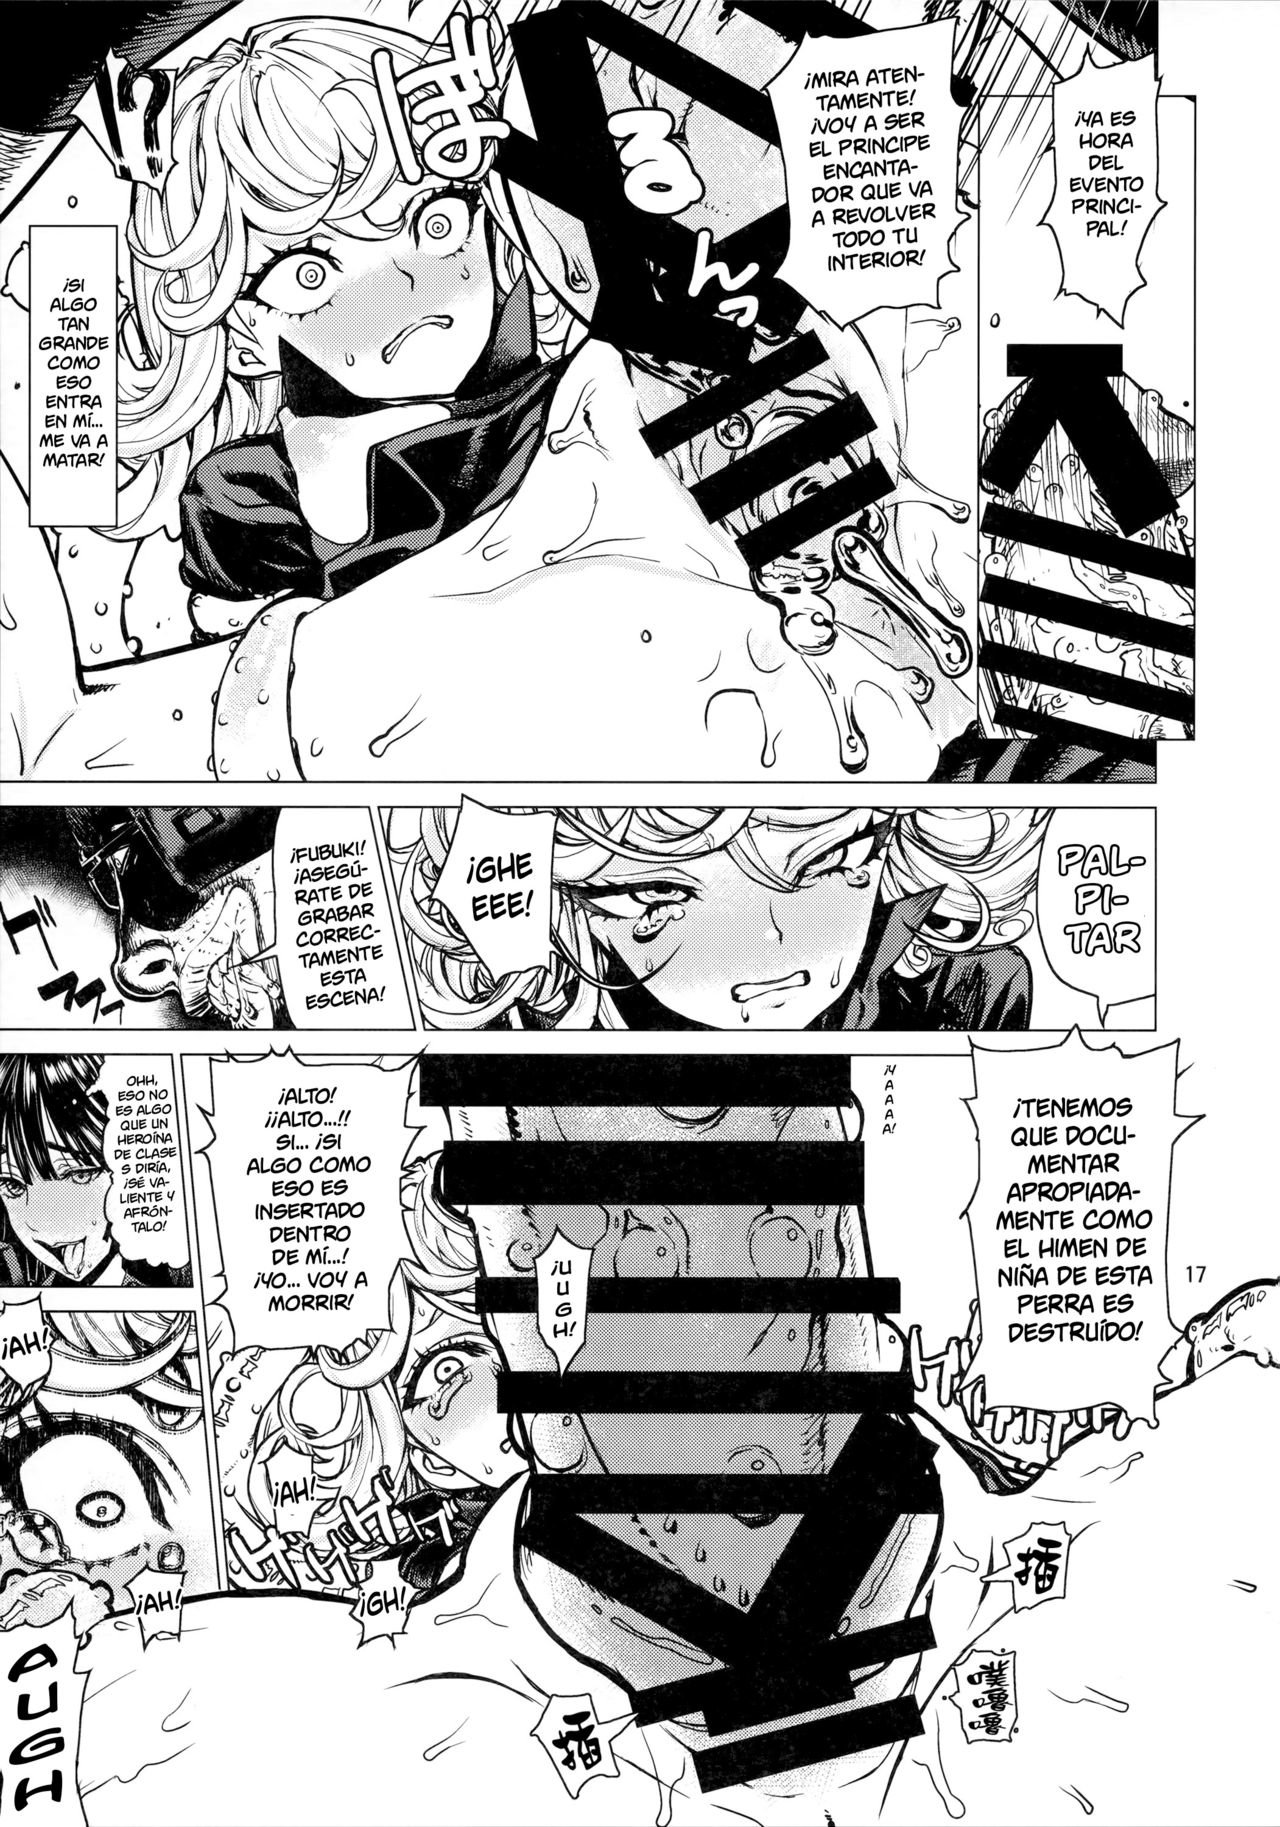 Disaster Sisters Leopard Hon 25 (One Punch Man) [Spanish] [NILG] - 15